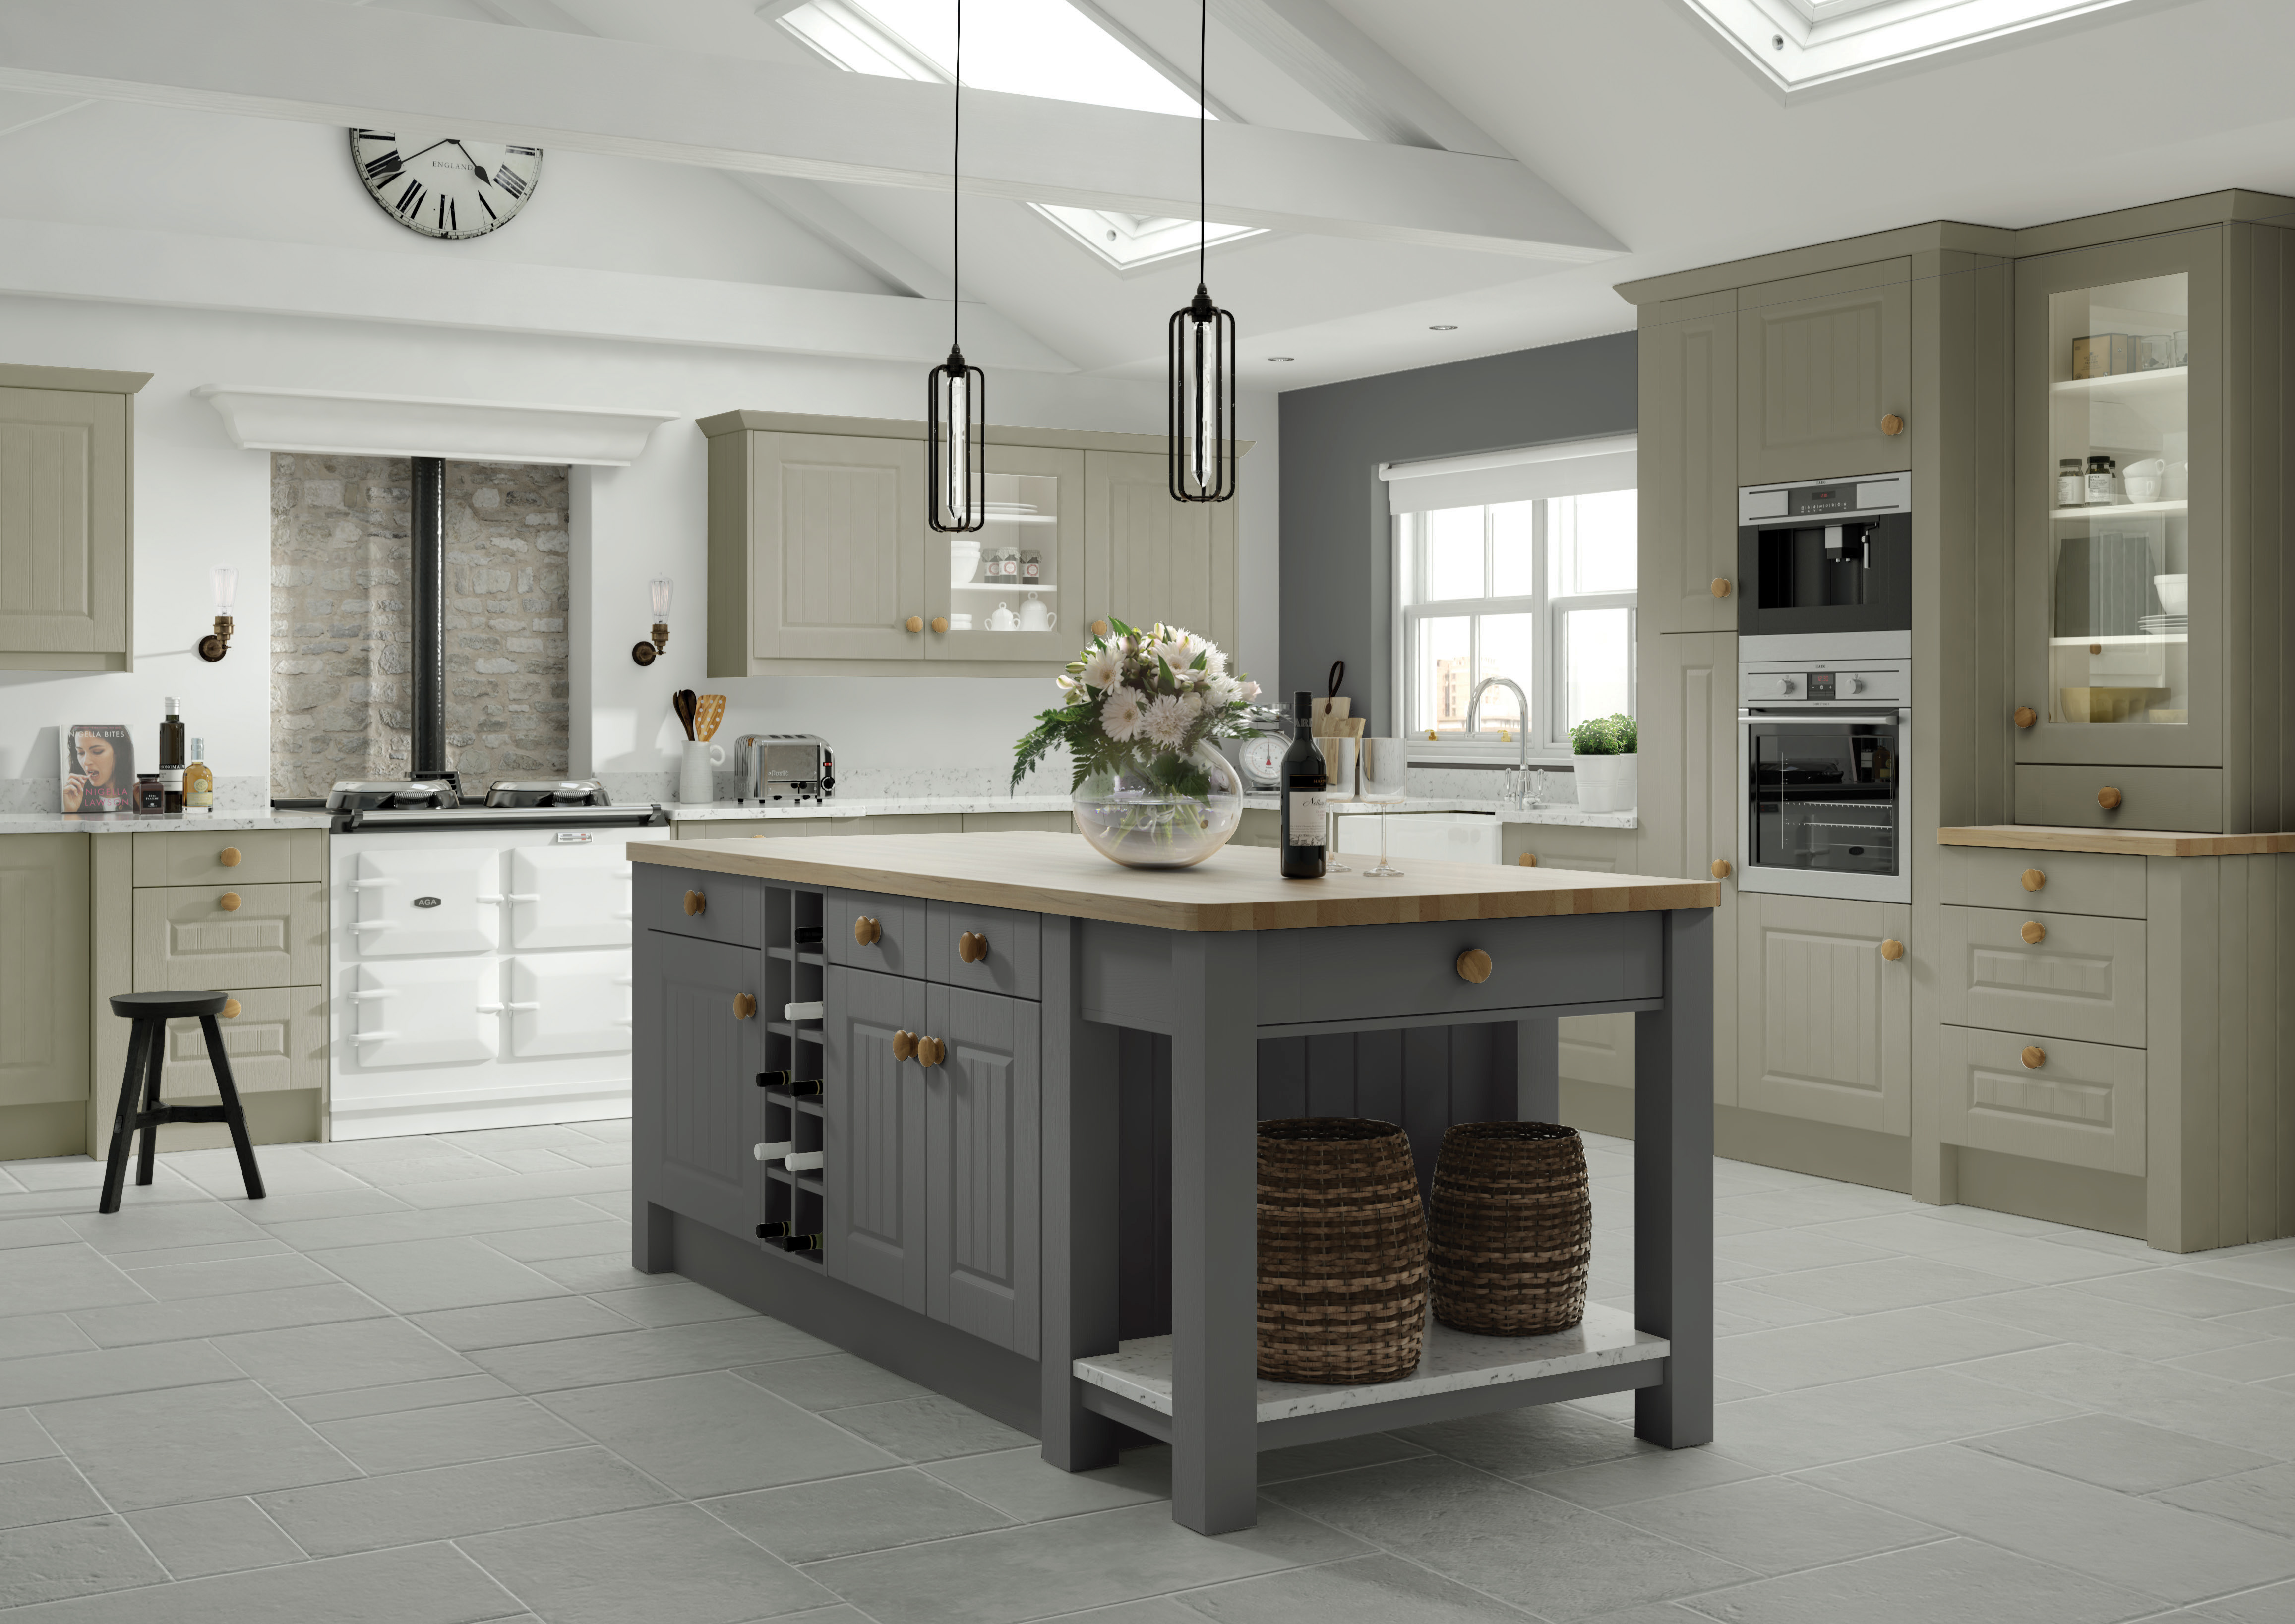 Grooved Kitchens